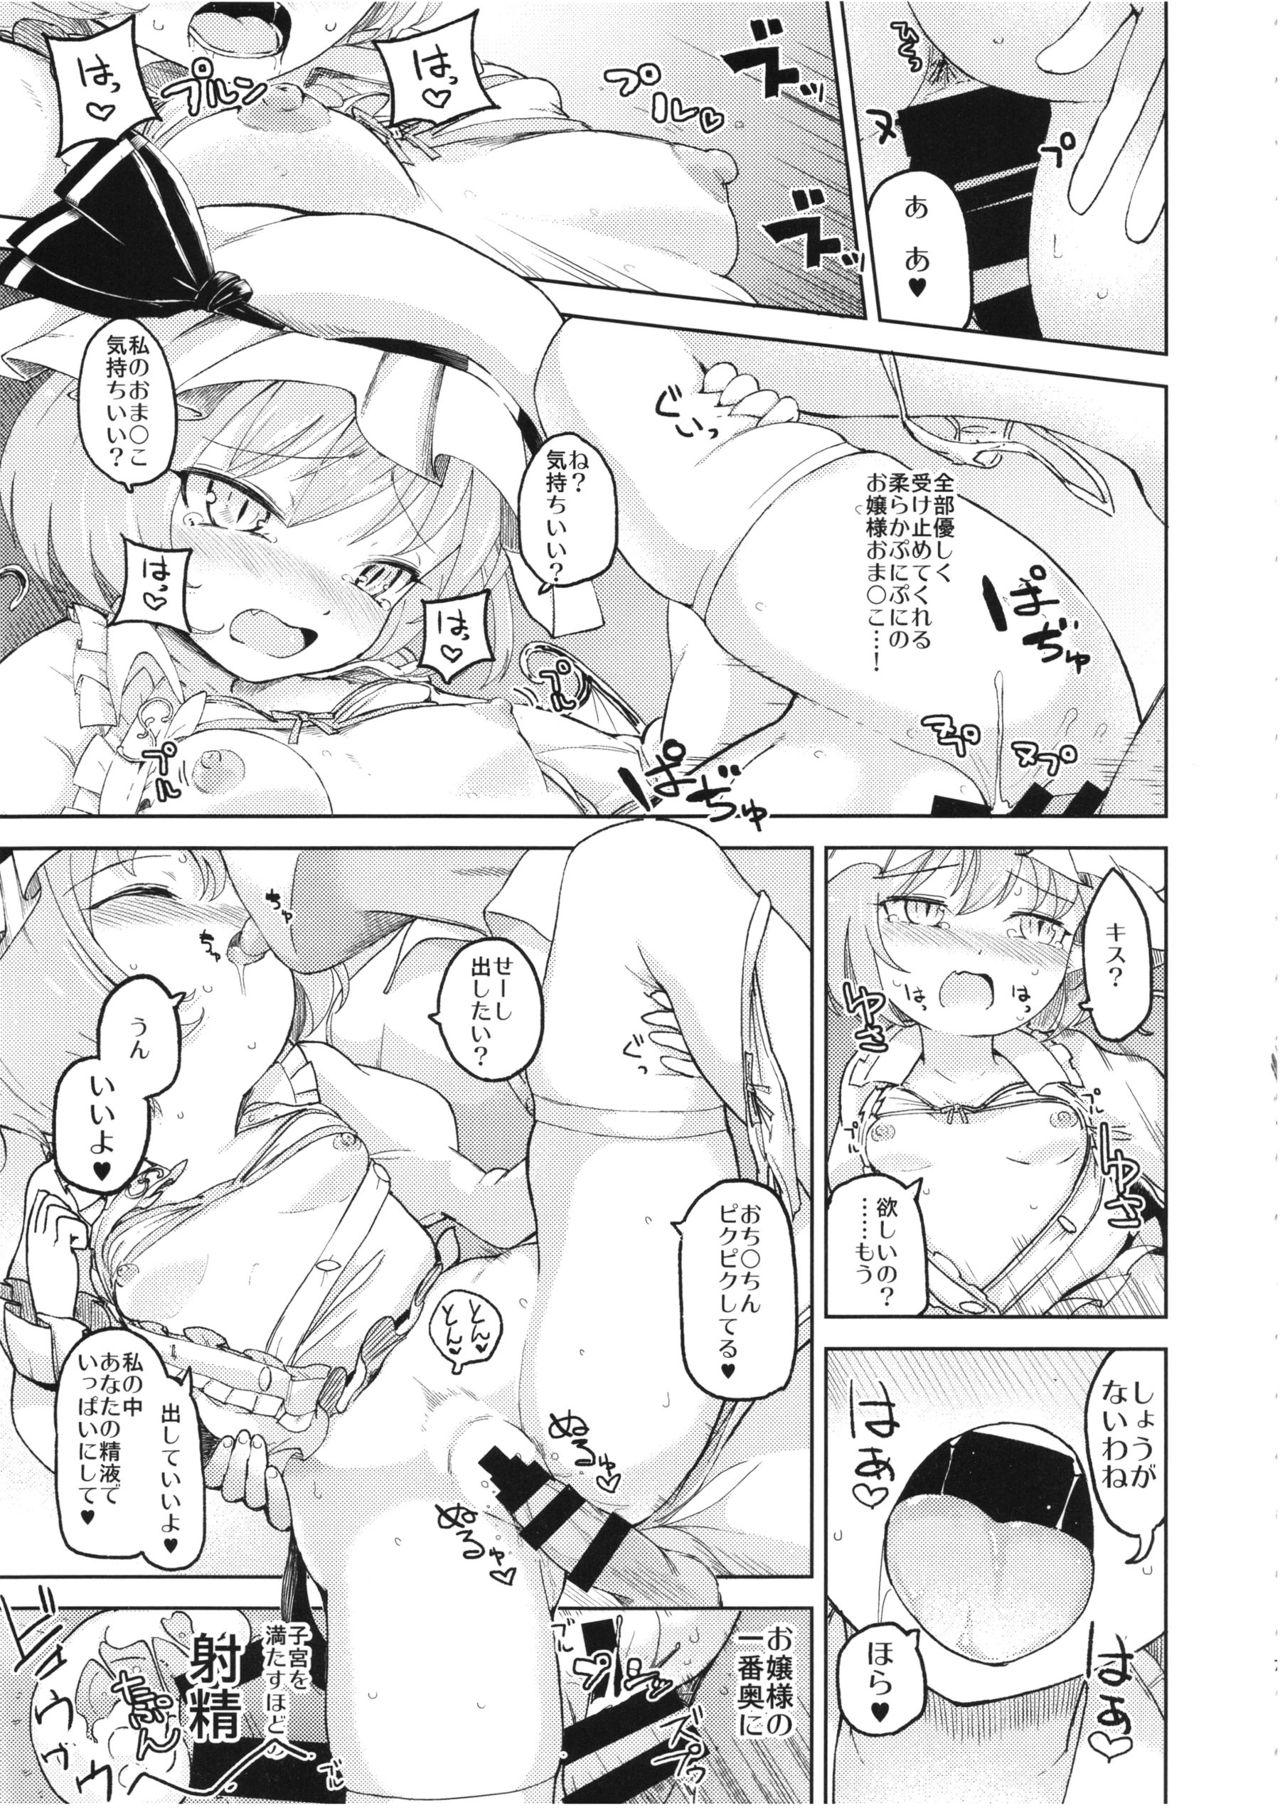 Costume Aisare Scarlet - Touhou project Rub - Page 7